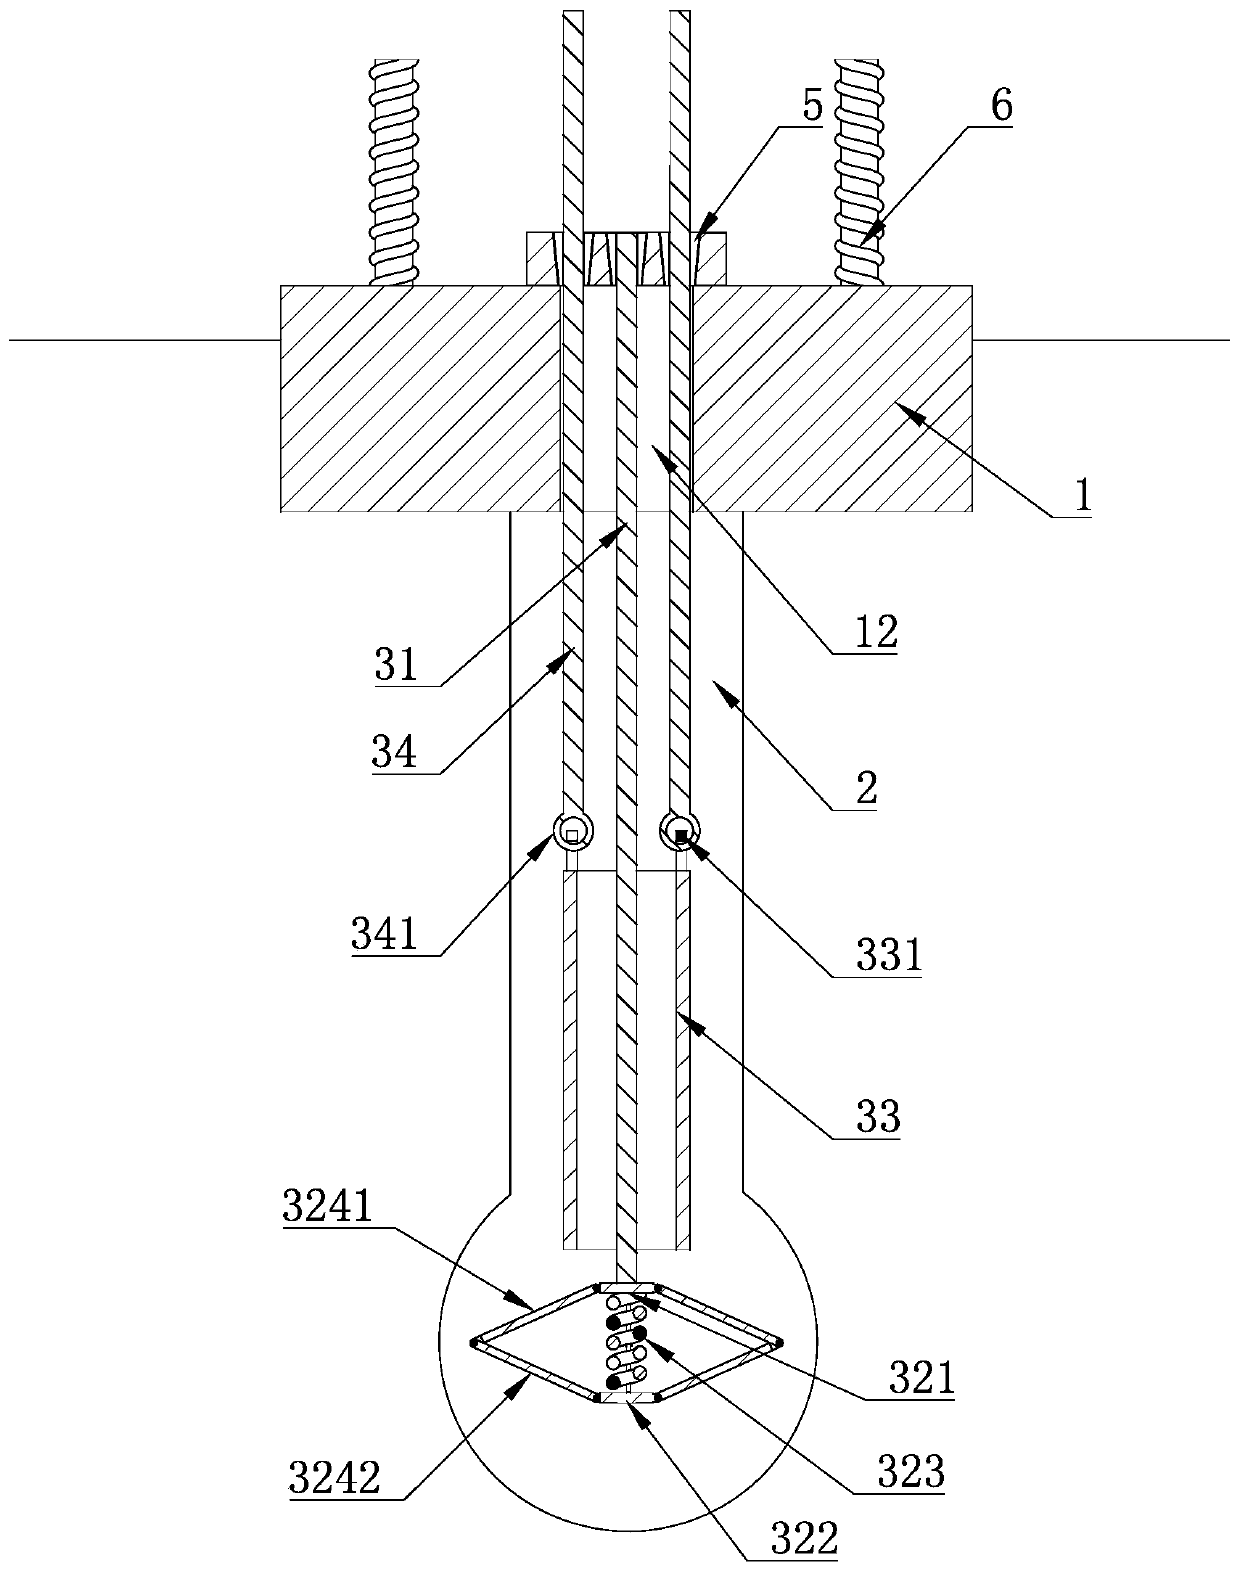 Single-anchor cable-slab foundation and construction method for transmission tower